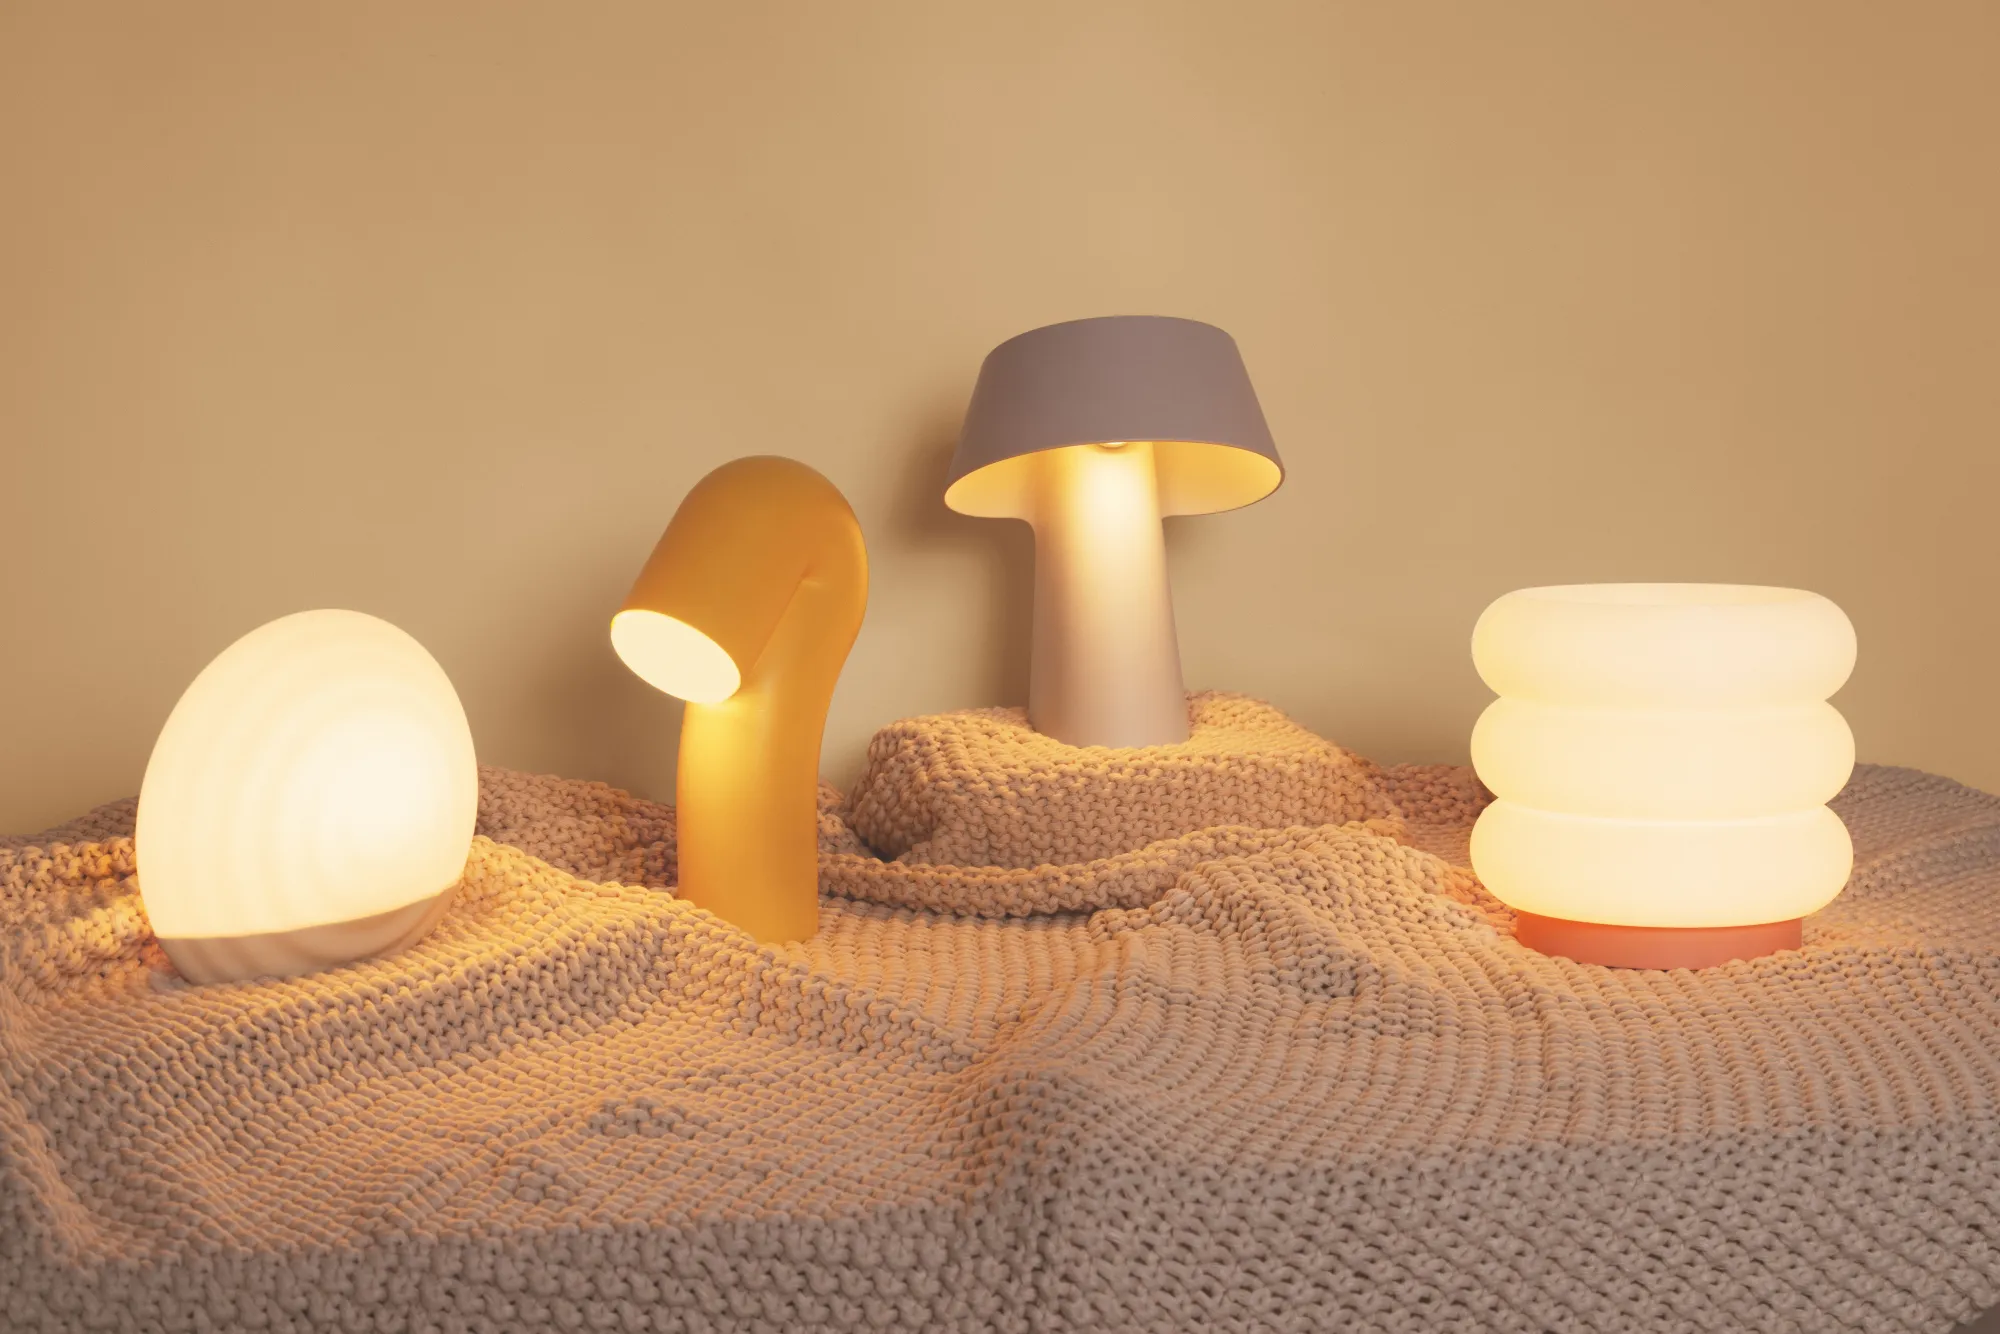 Four table lights by Gantri placed side by side, from left to right: the Kobble Table Light, Smoothy Table Light, Fold Table Light, and Argizari Table Light.